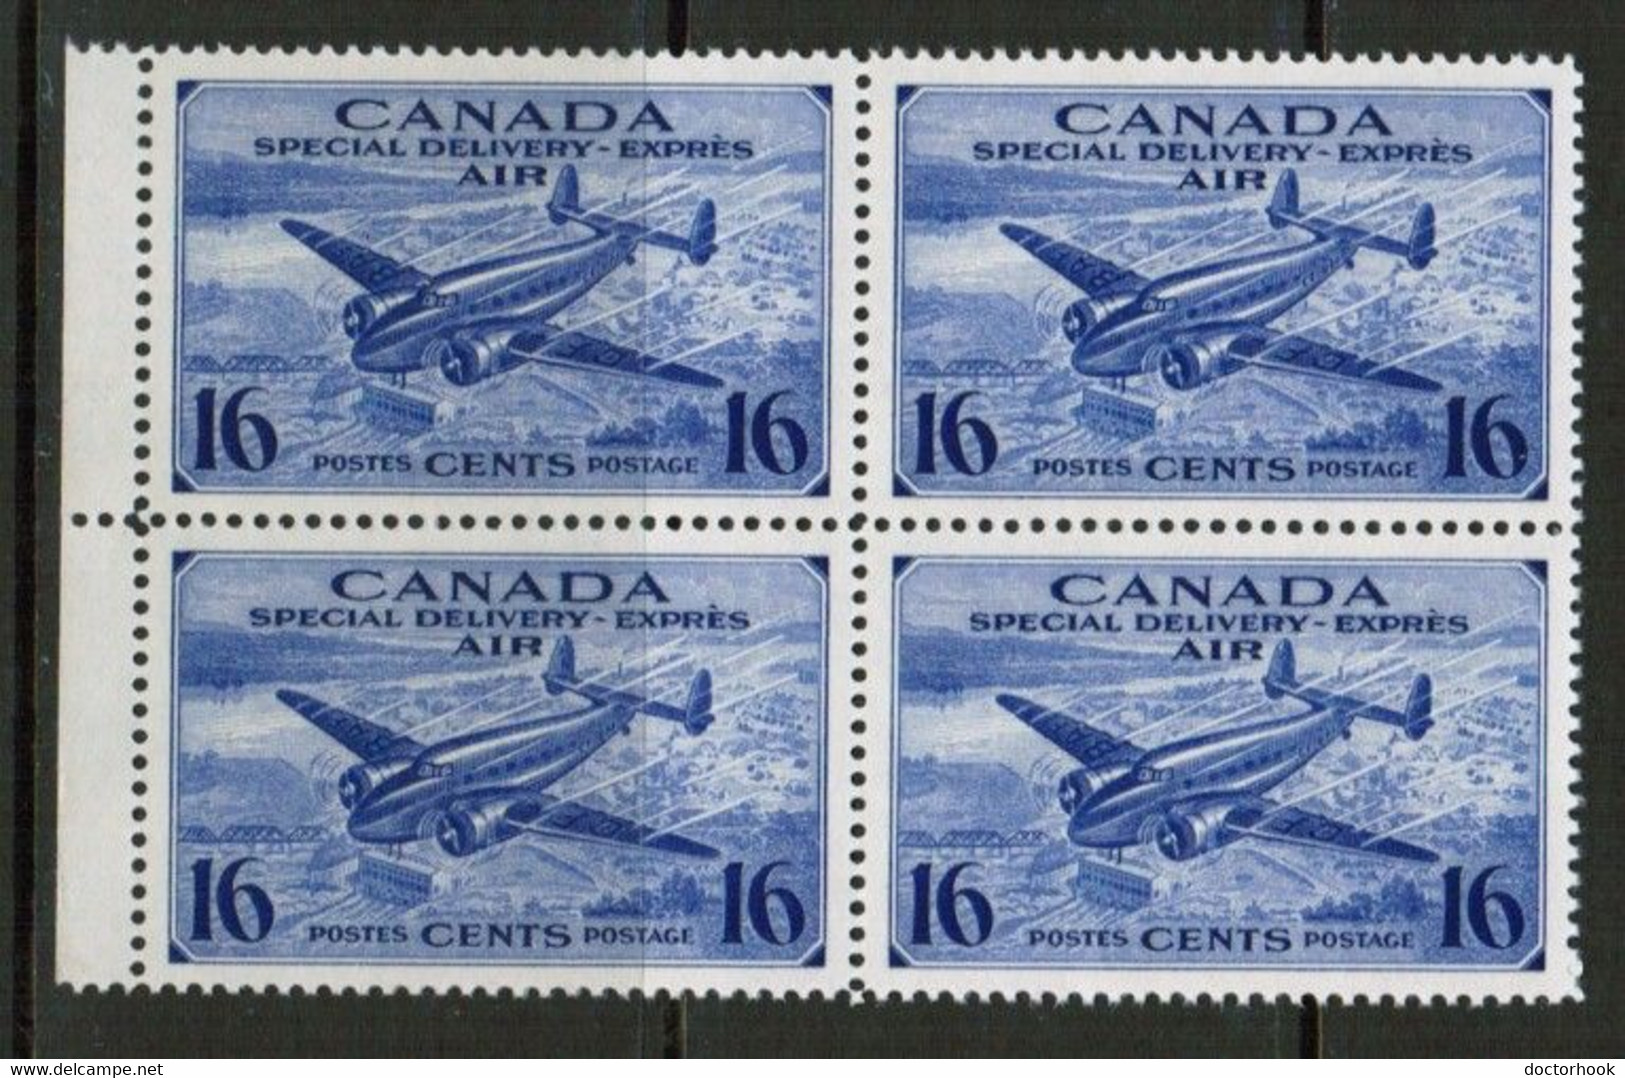 CANADA  Scott # CE 1** VF MINT NH BLOCK Of 4 (LG-1340) - Airmail: Special Delivery